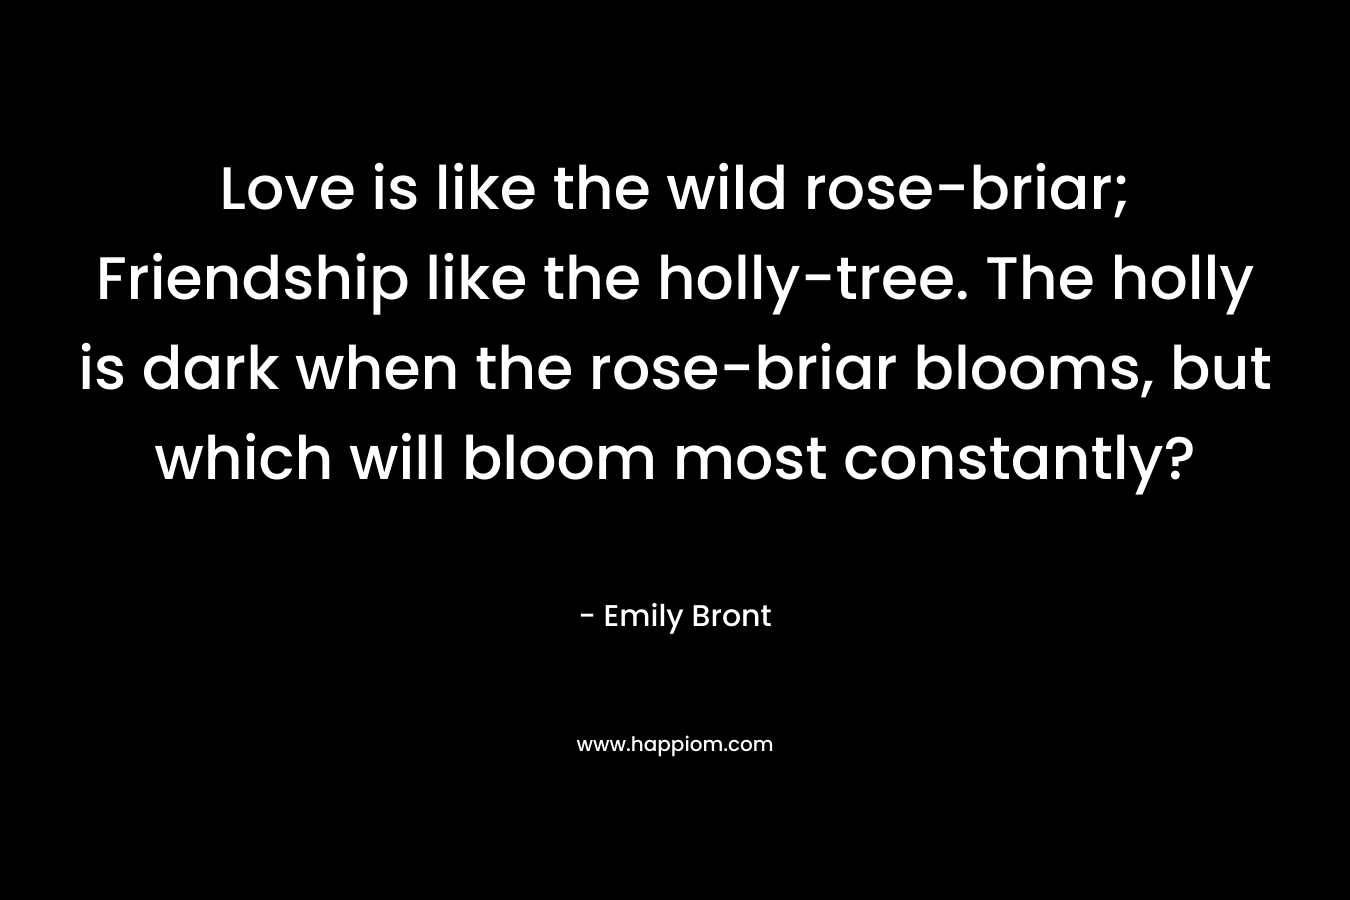 Love is like the wild rose-briar; Friendship like the holly-tree. The holly is dark when the rose-briar blooms, but which will bloom most constantly?